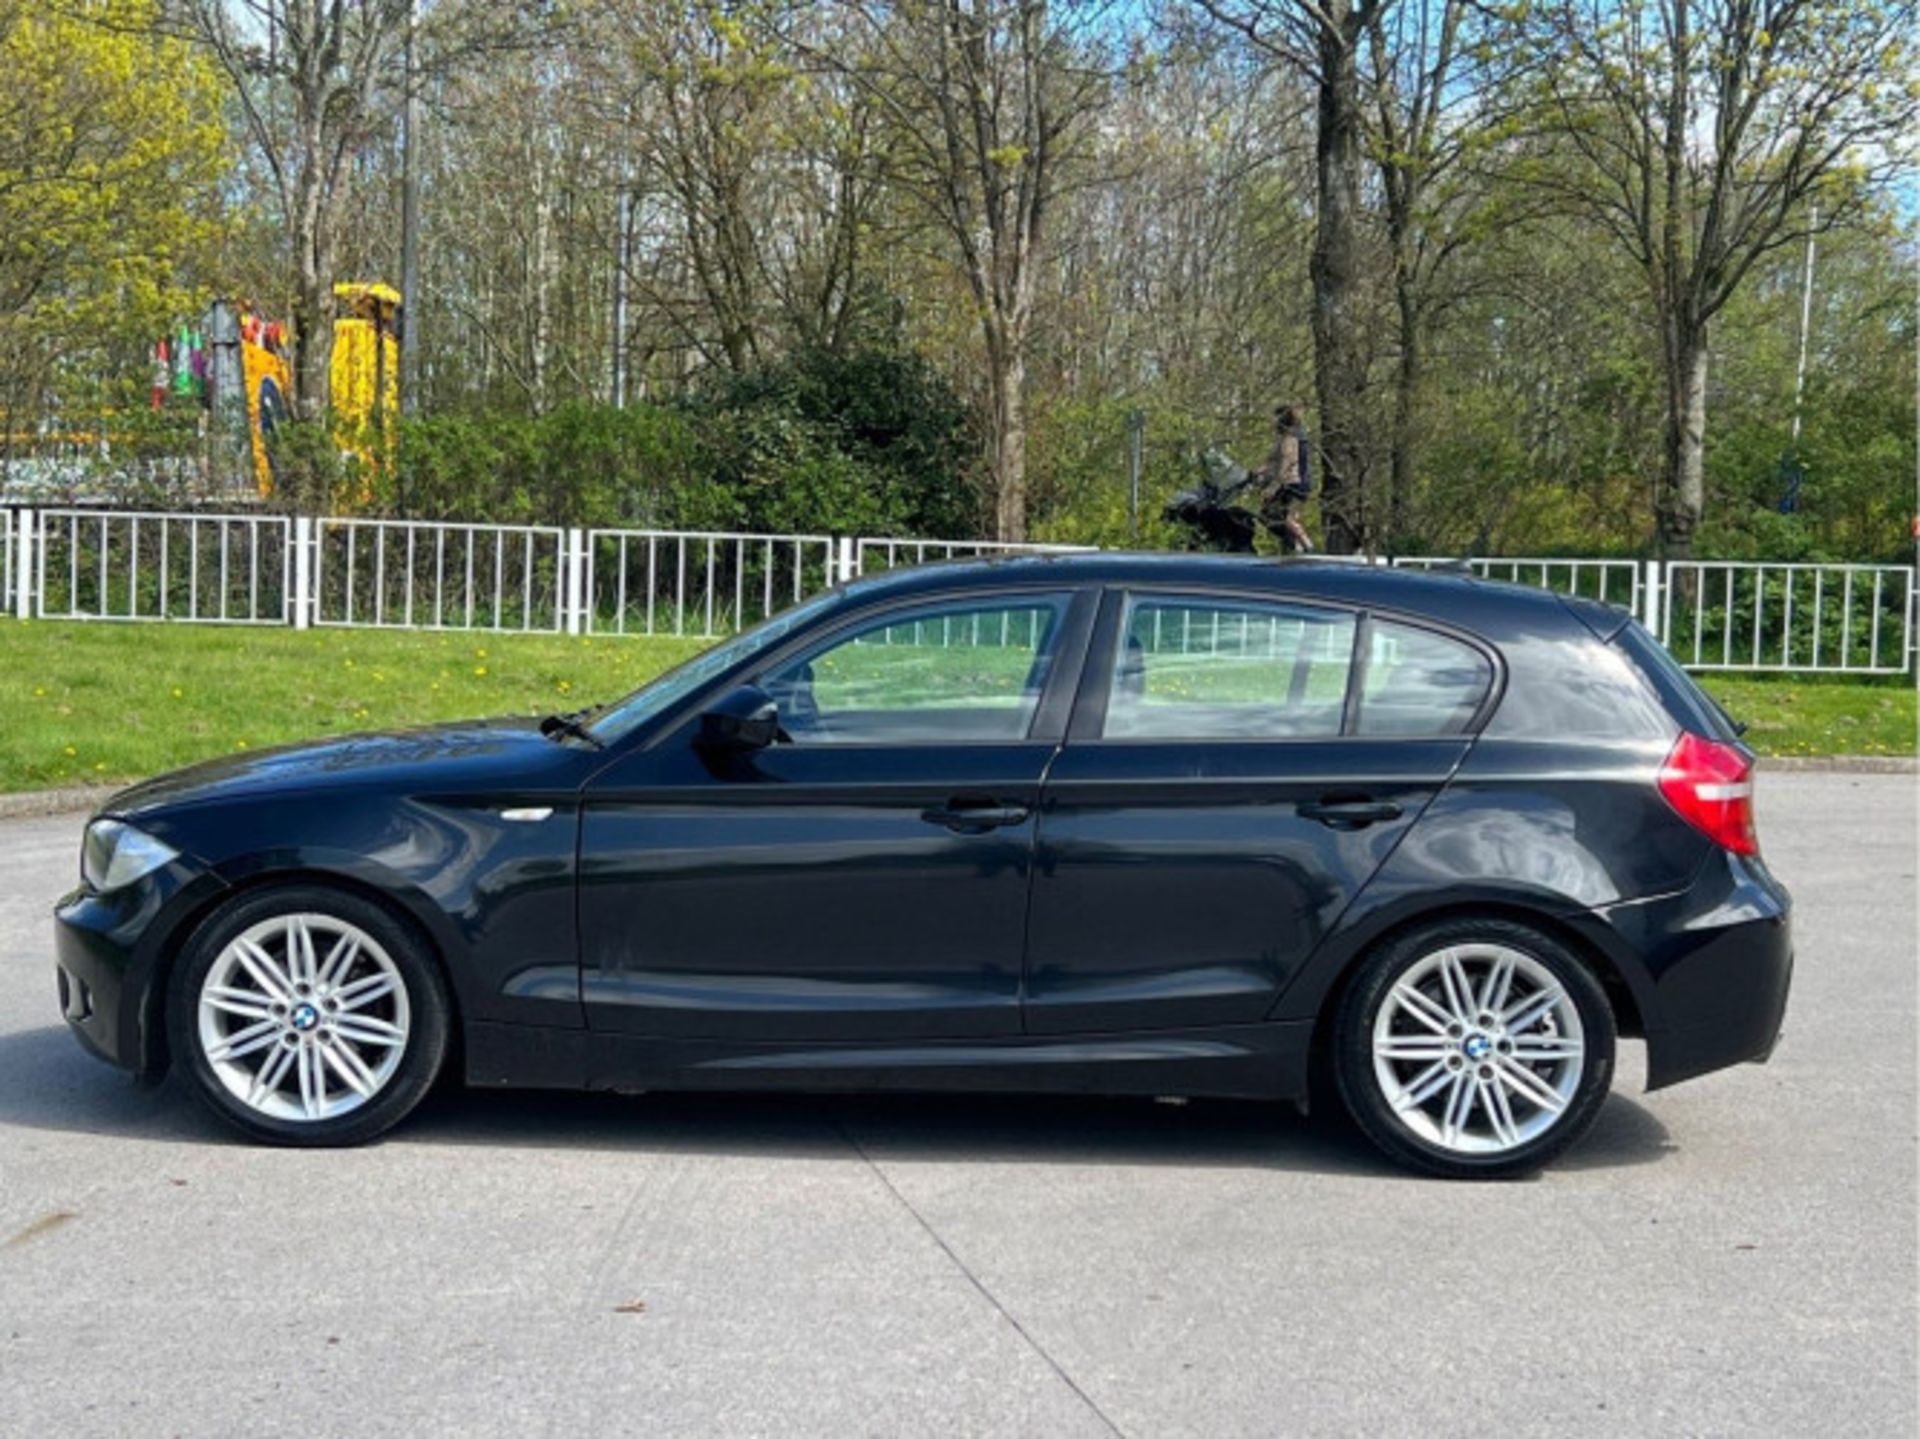 BMW 1 SERIES 2.0 118D M SPORT EURO 5 5DR (2010) - Image 6 of 58